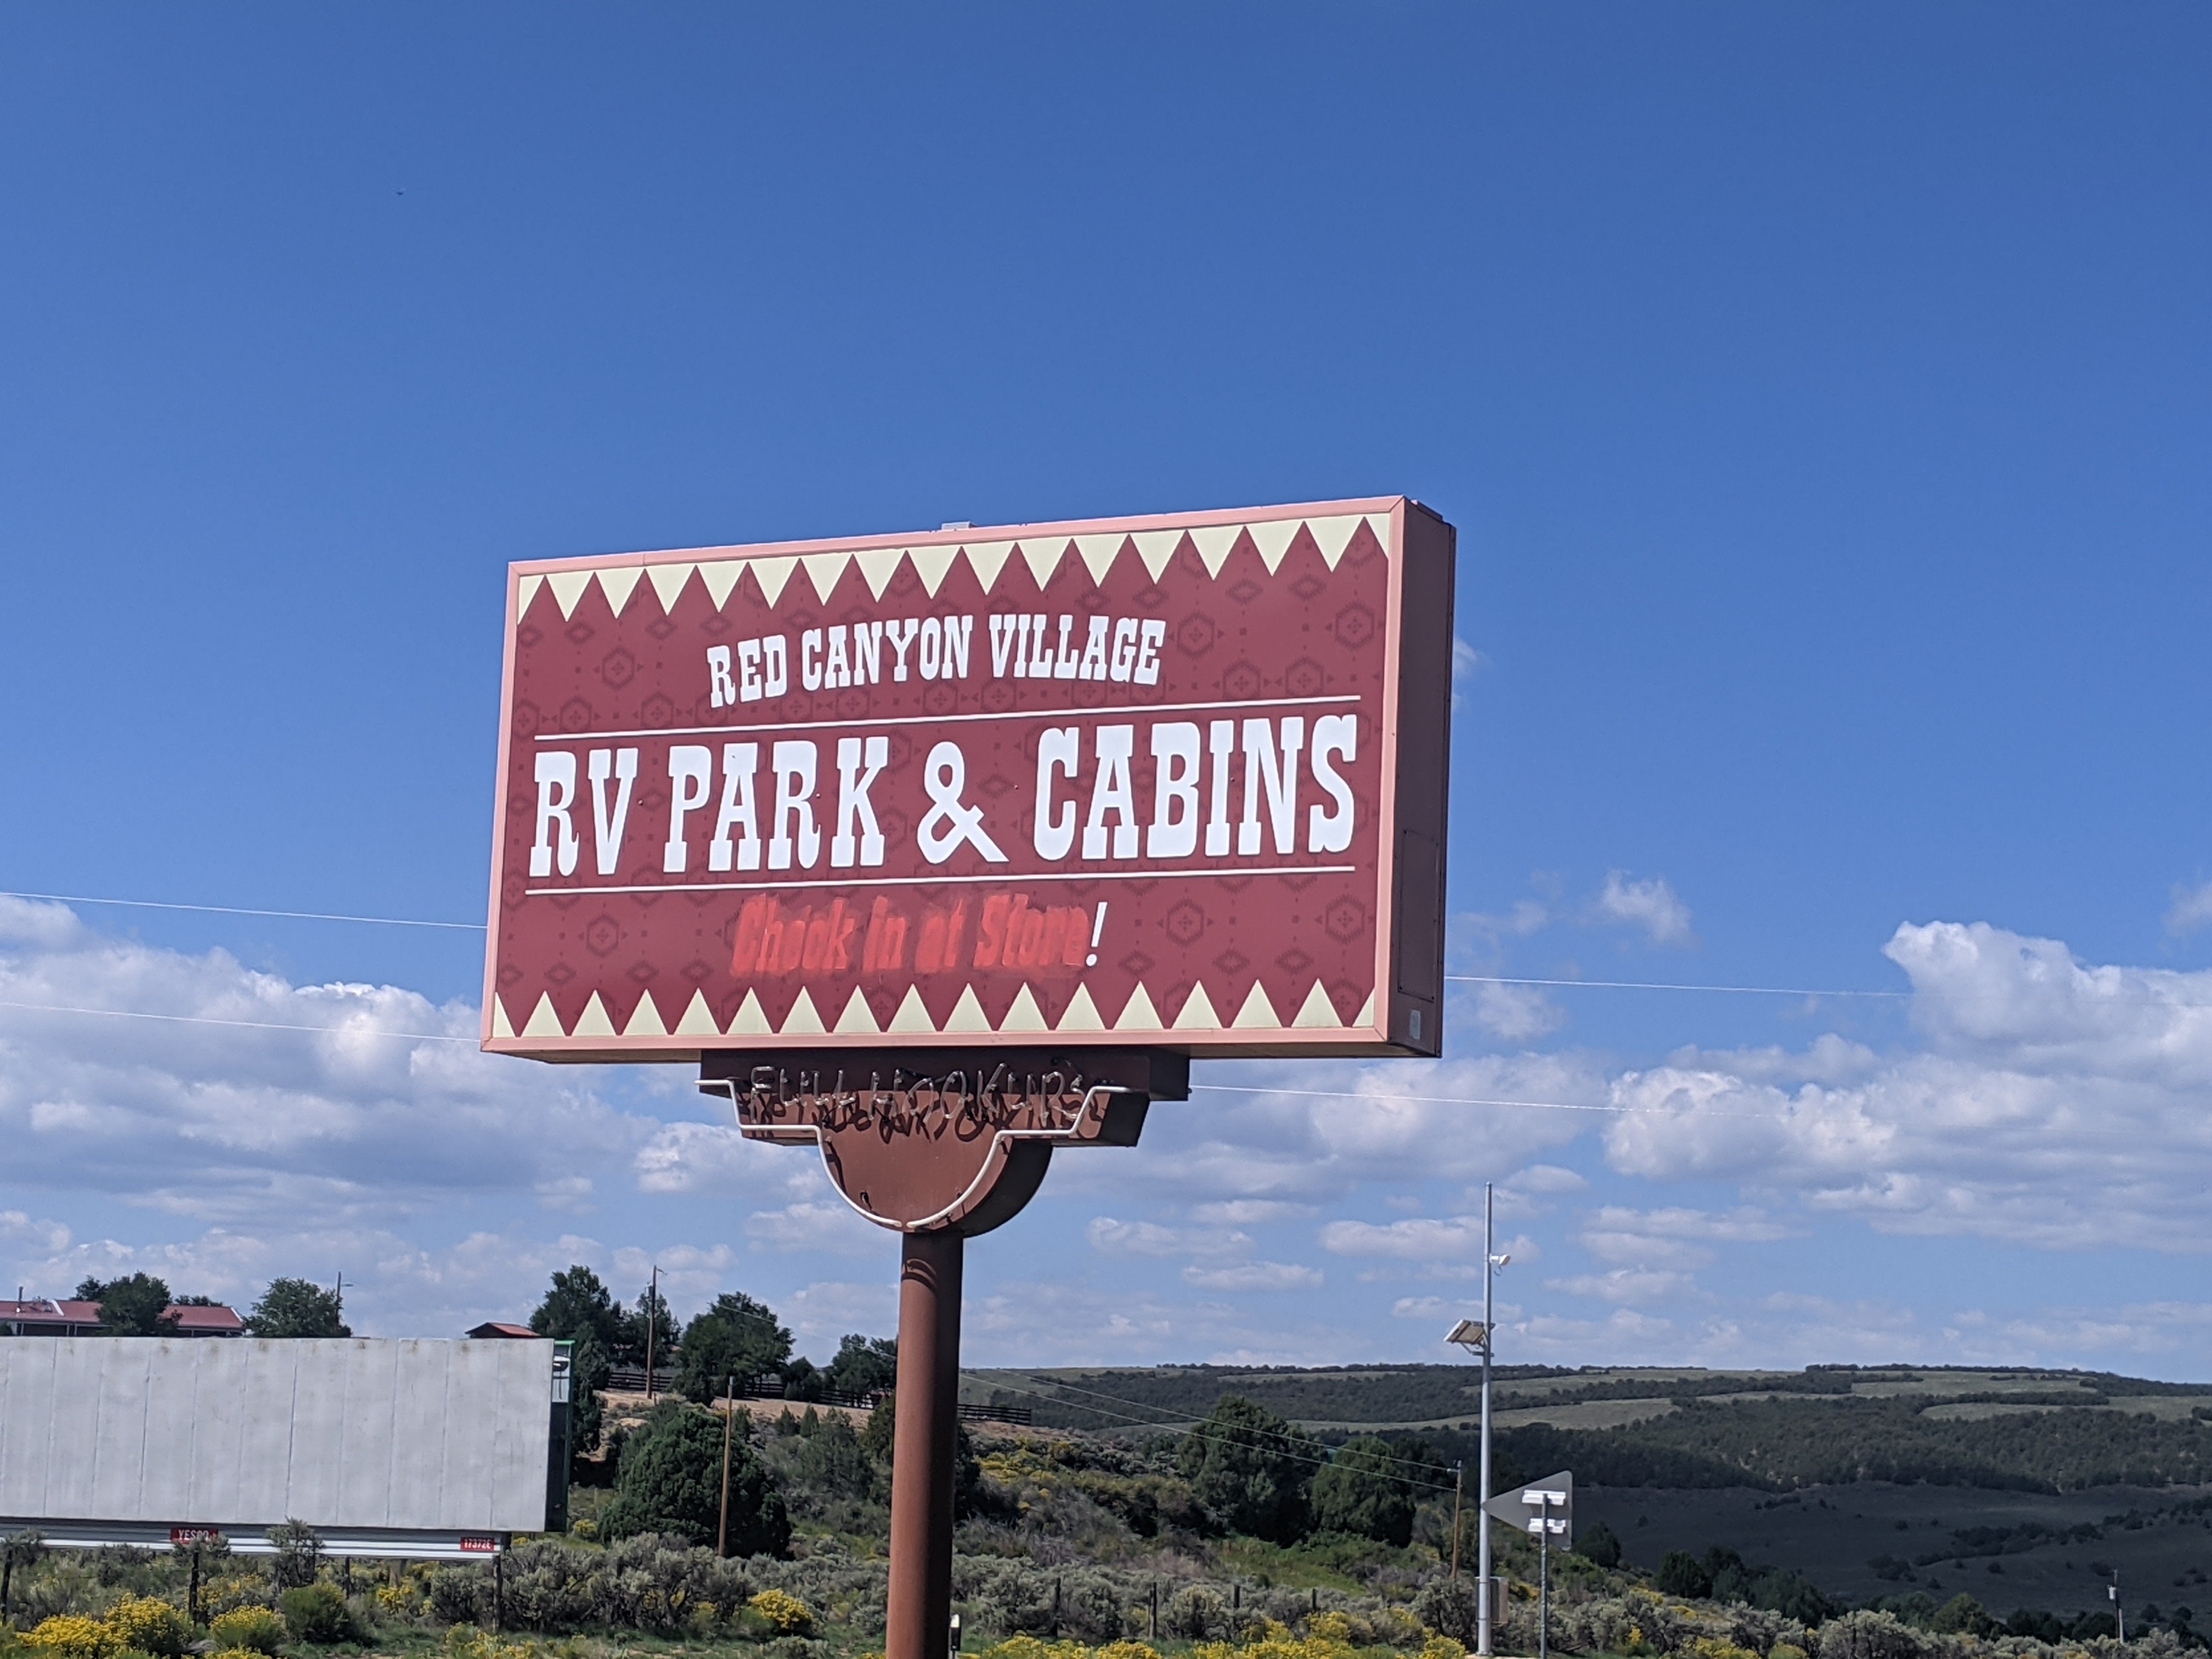 Camper submitted image from Red Canyon Village RV Park - 1